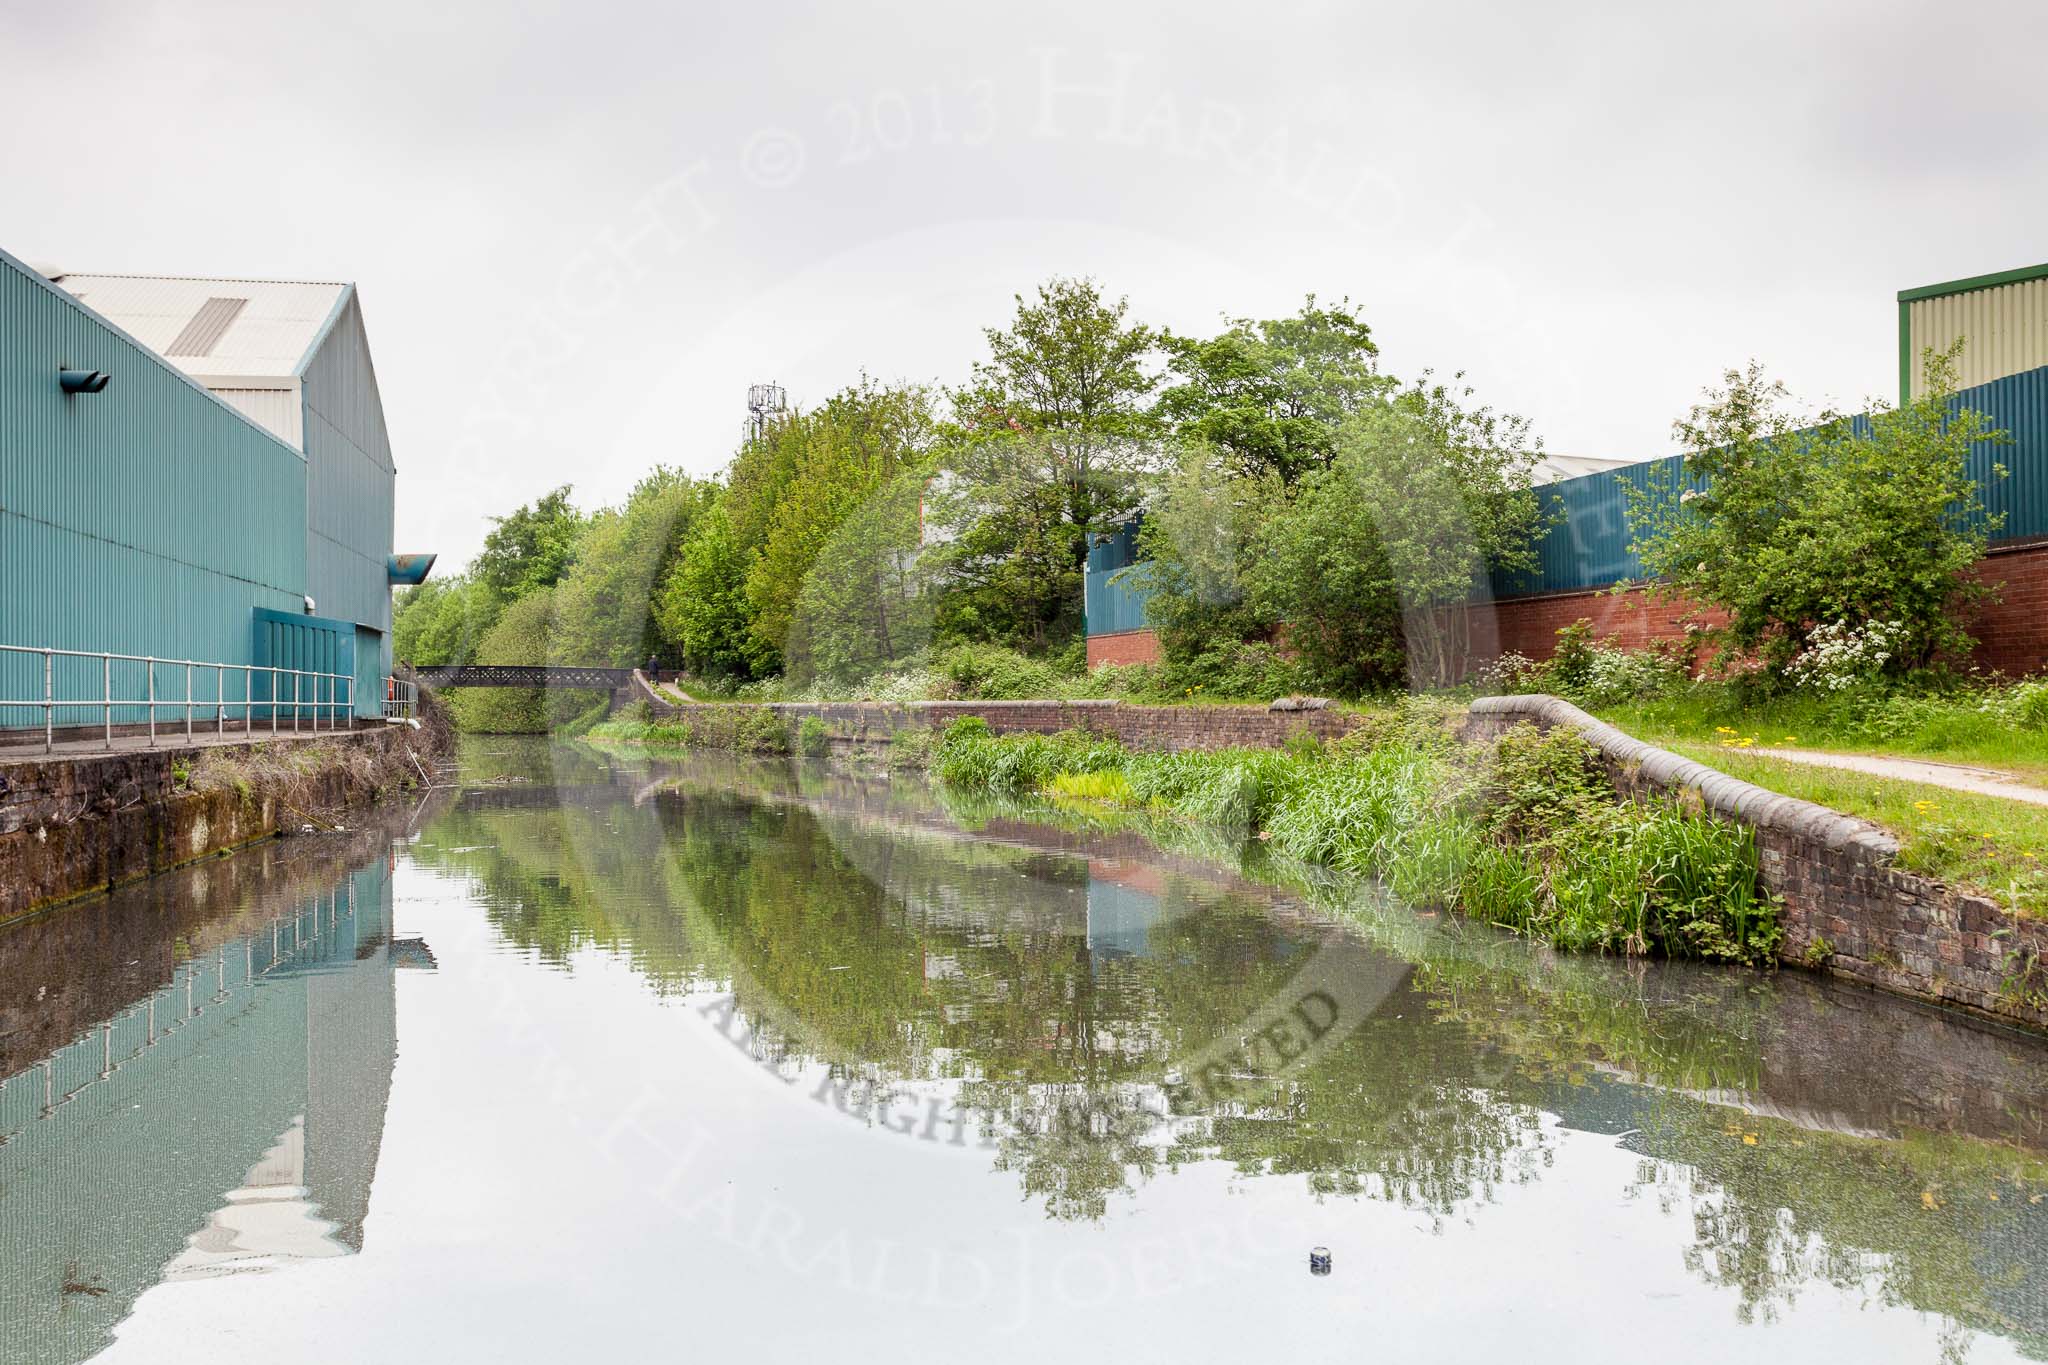 BCN 24h Marathon Challenge 2015: The Wednesbury Old Canal near Pudding Green Junction. The Izon Branch ued to be on the left, and the Union Branch on the right in front of the bridge.
Birmingham Canal Navigations,



on 23 May 2015 at 12:52, image #105